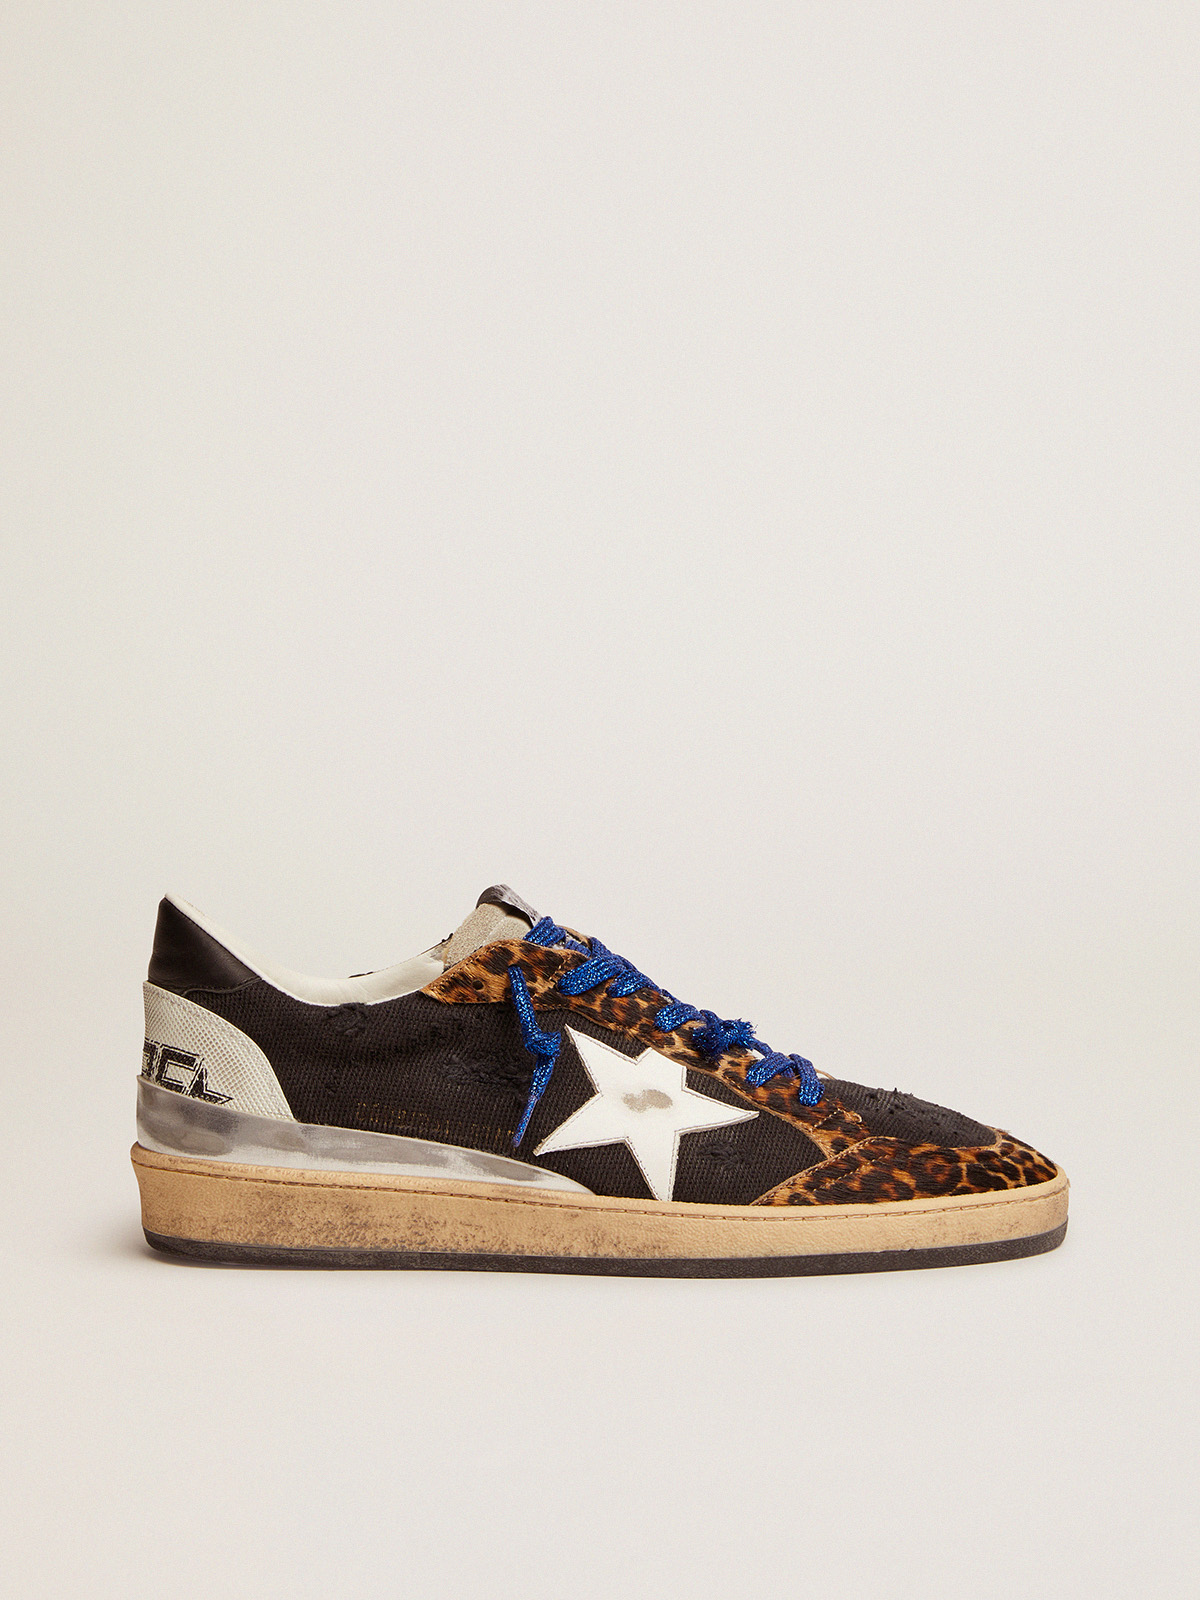 Ball Star sneakers in black canvas, leopard-print pony skin inserts and  multi-foxing | Golden Goose